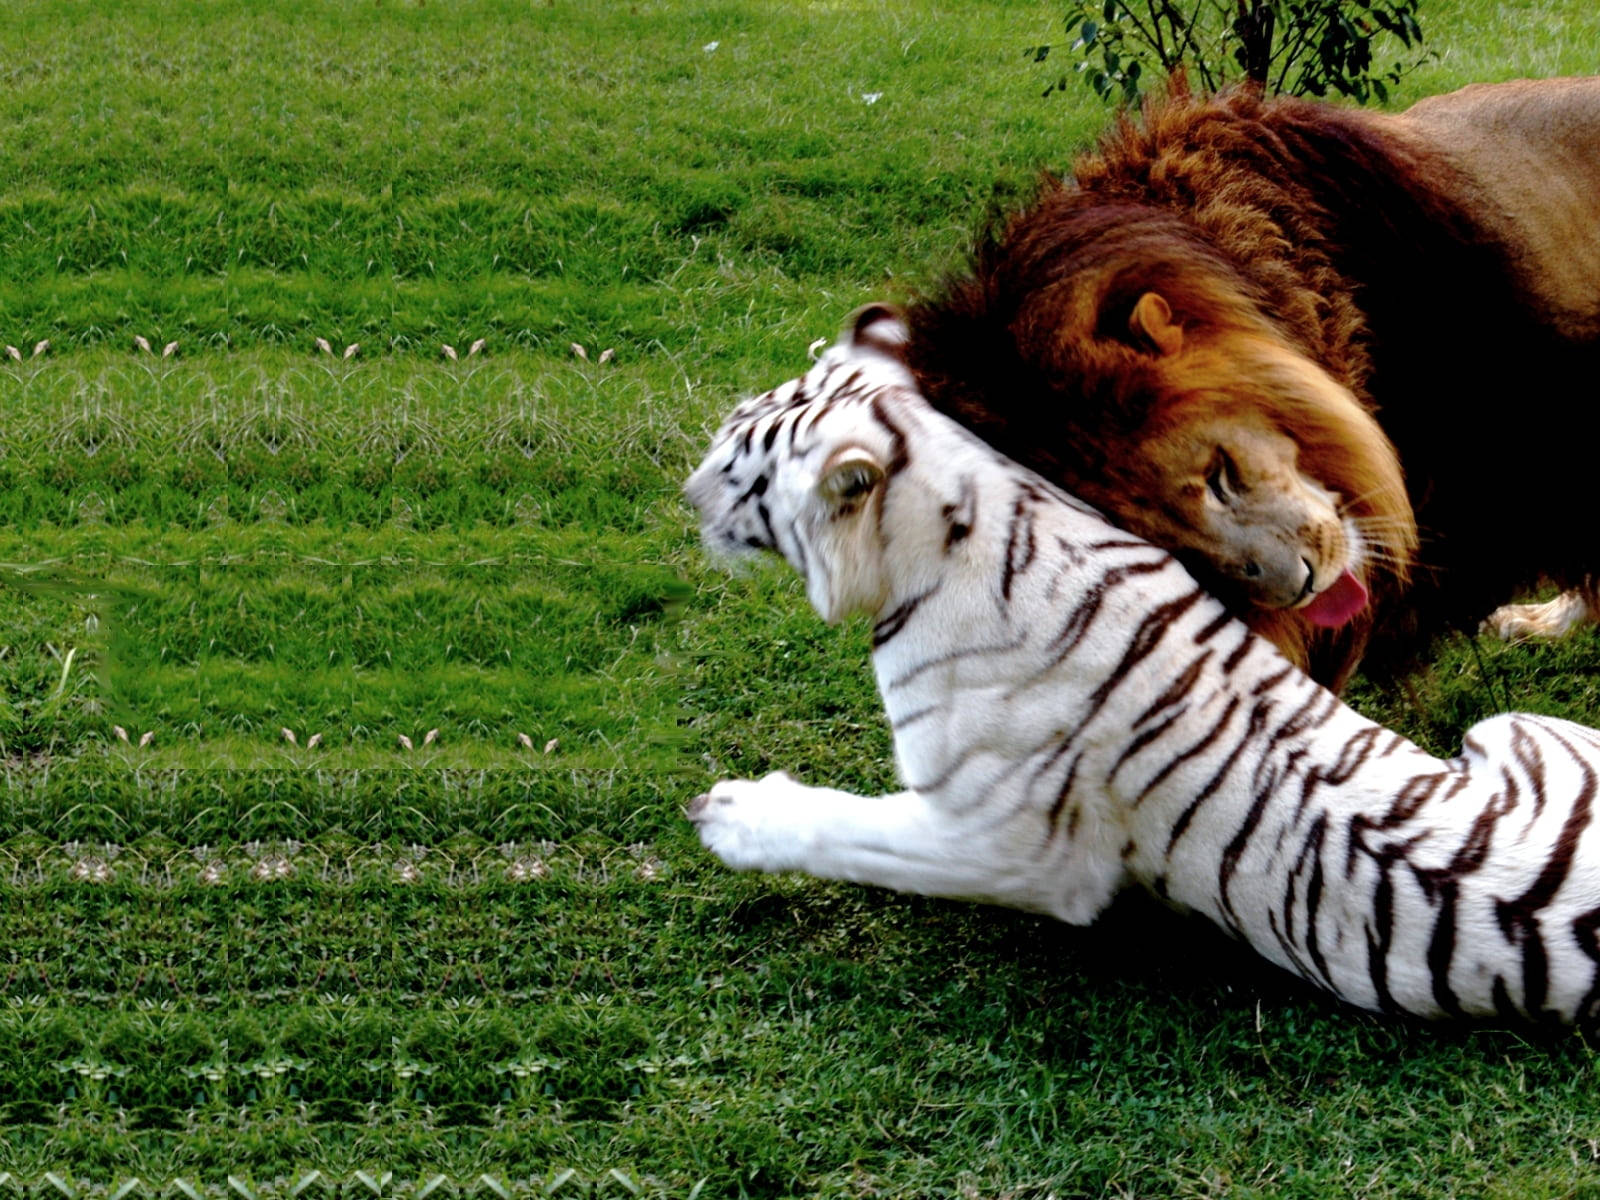 Friendly Lion And Tiger In Grass Wallpaper